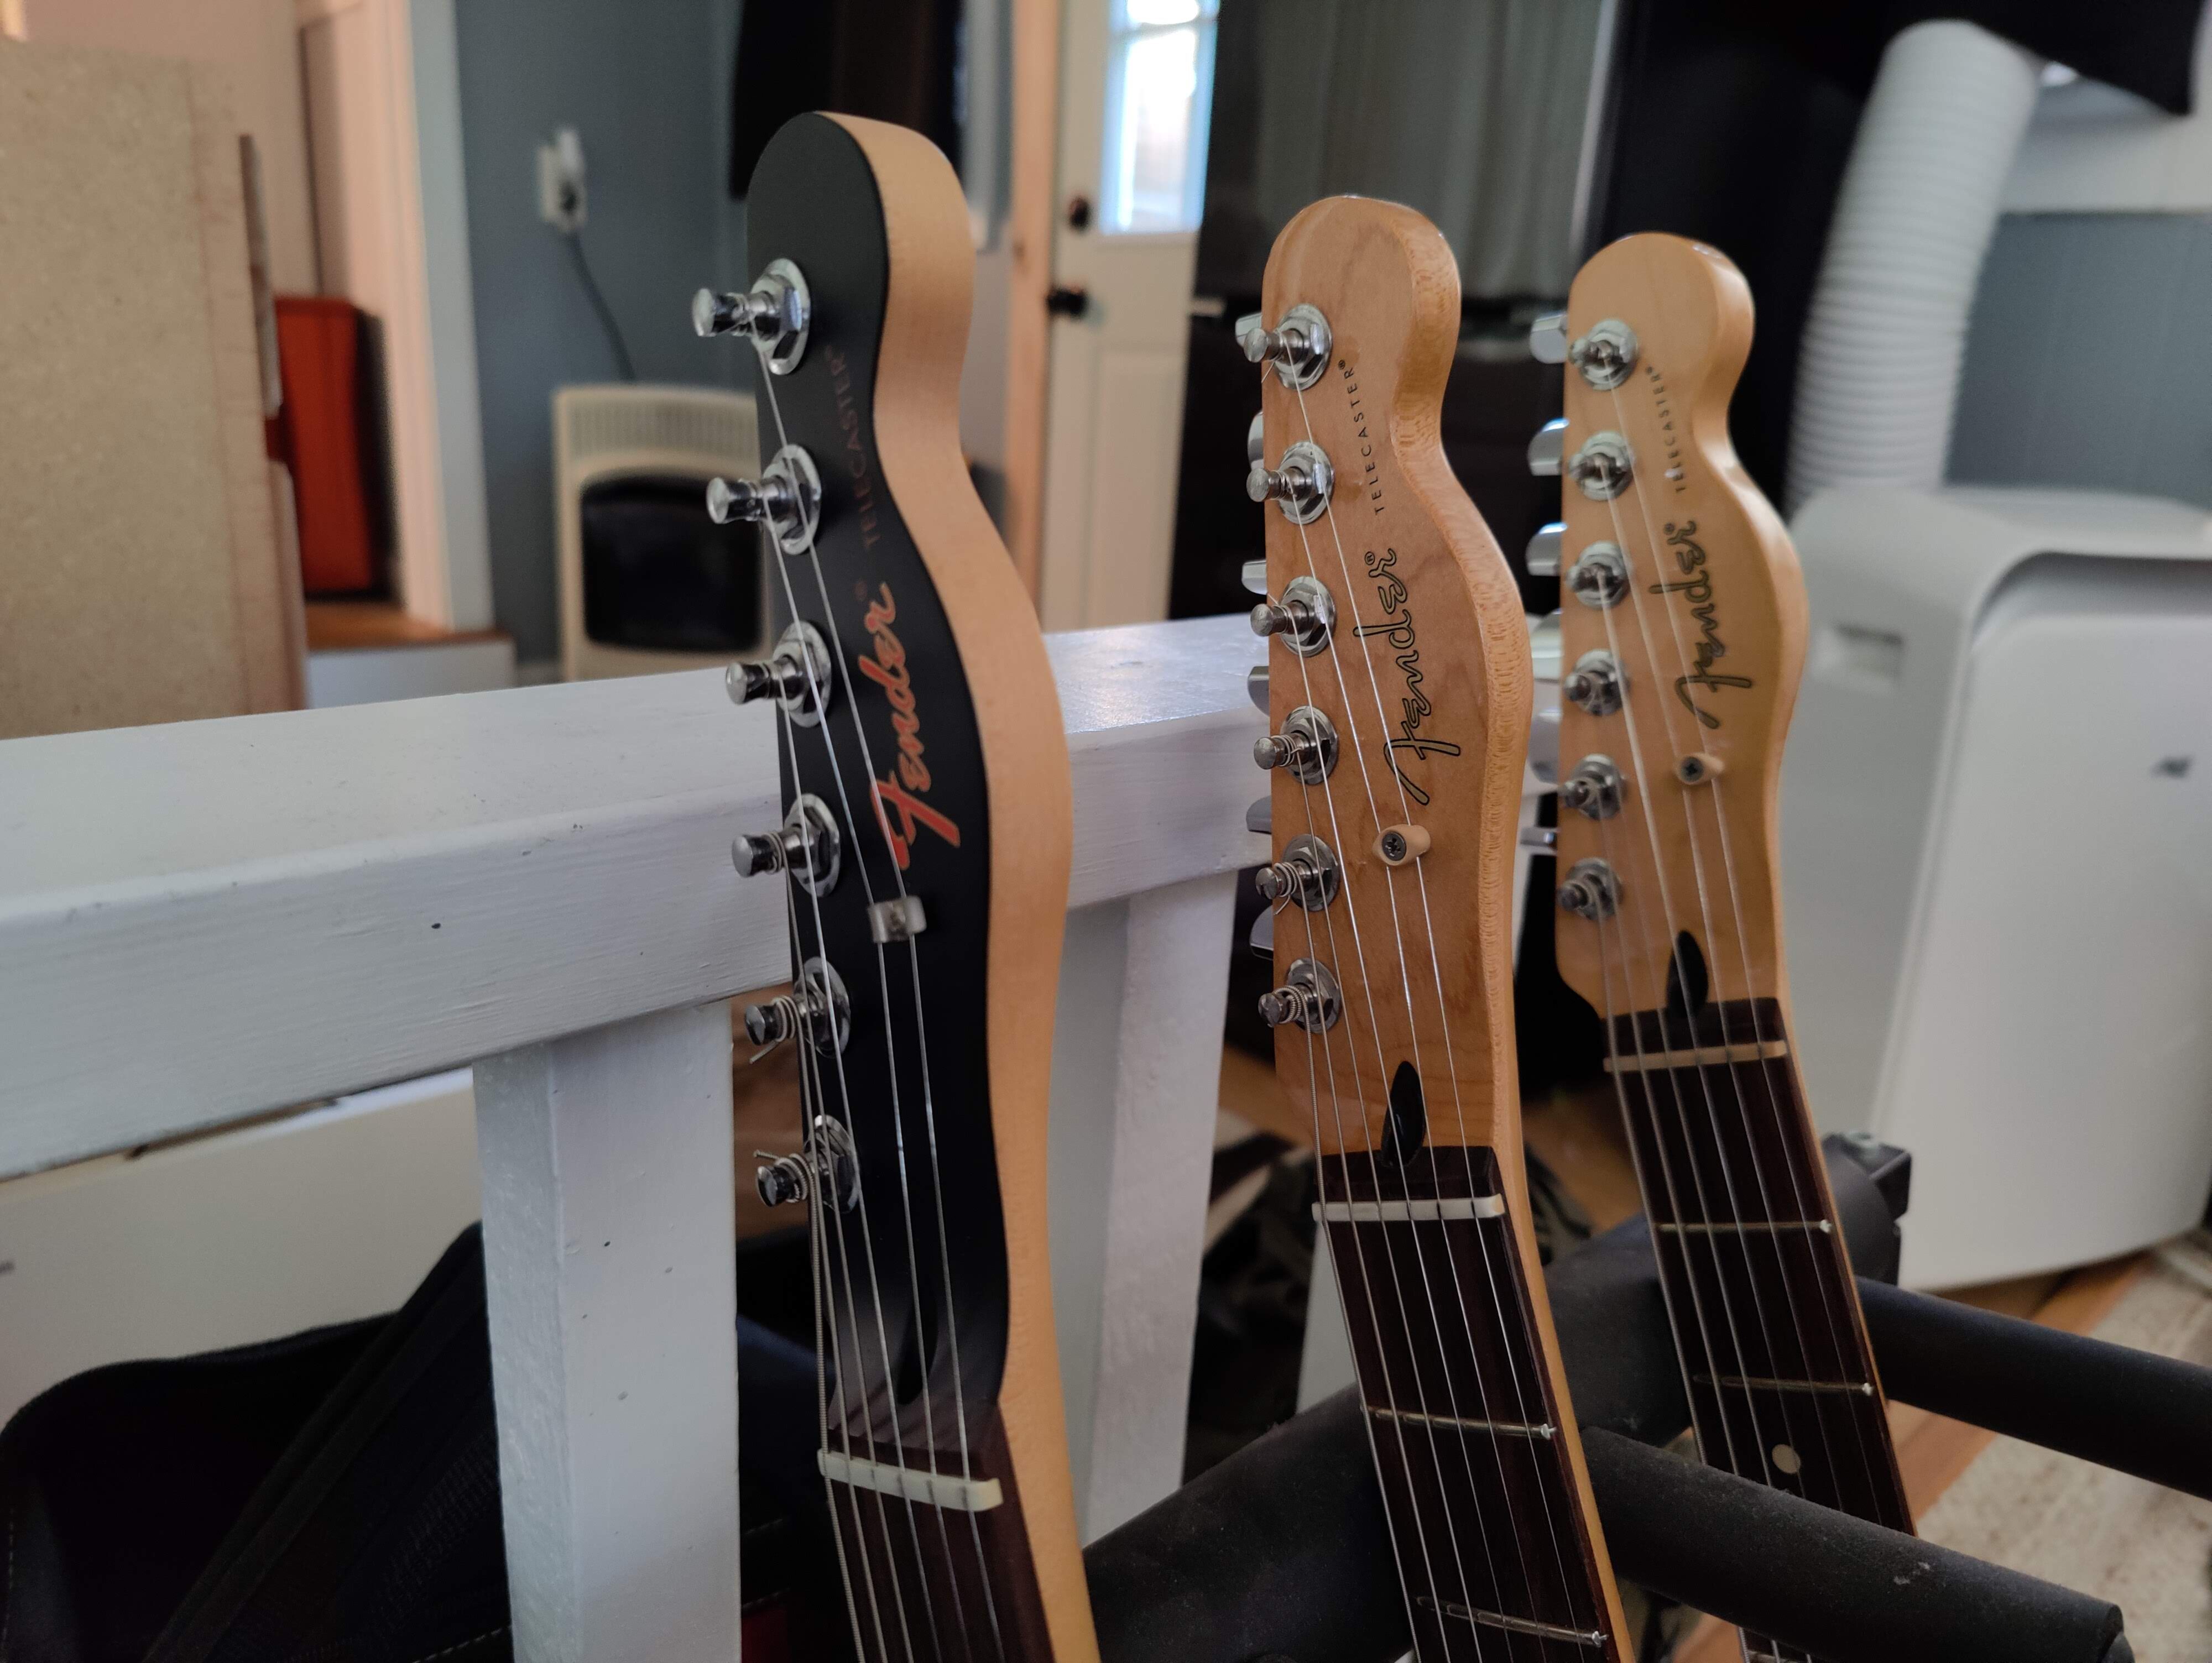 OnePlus 9 Pro Camera Sample: A closeup of three Fender Telecaster guitar headstocks shot indoors with the main camera